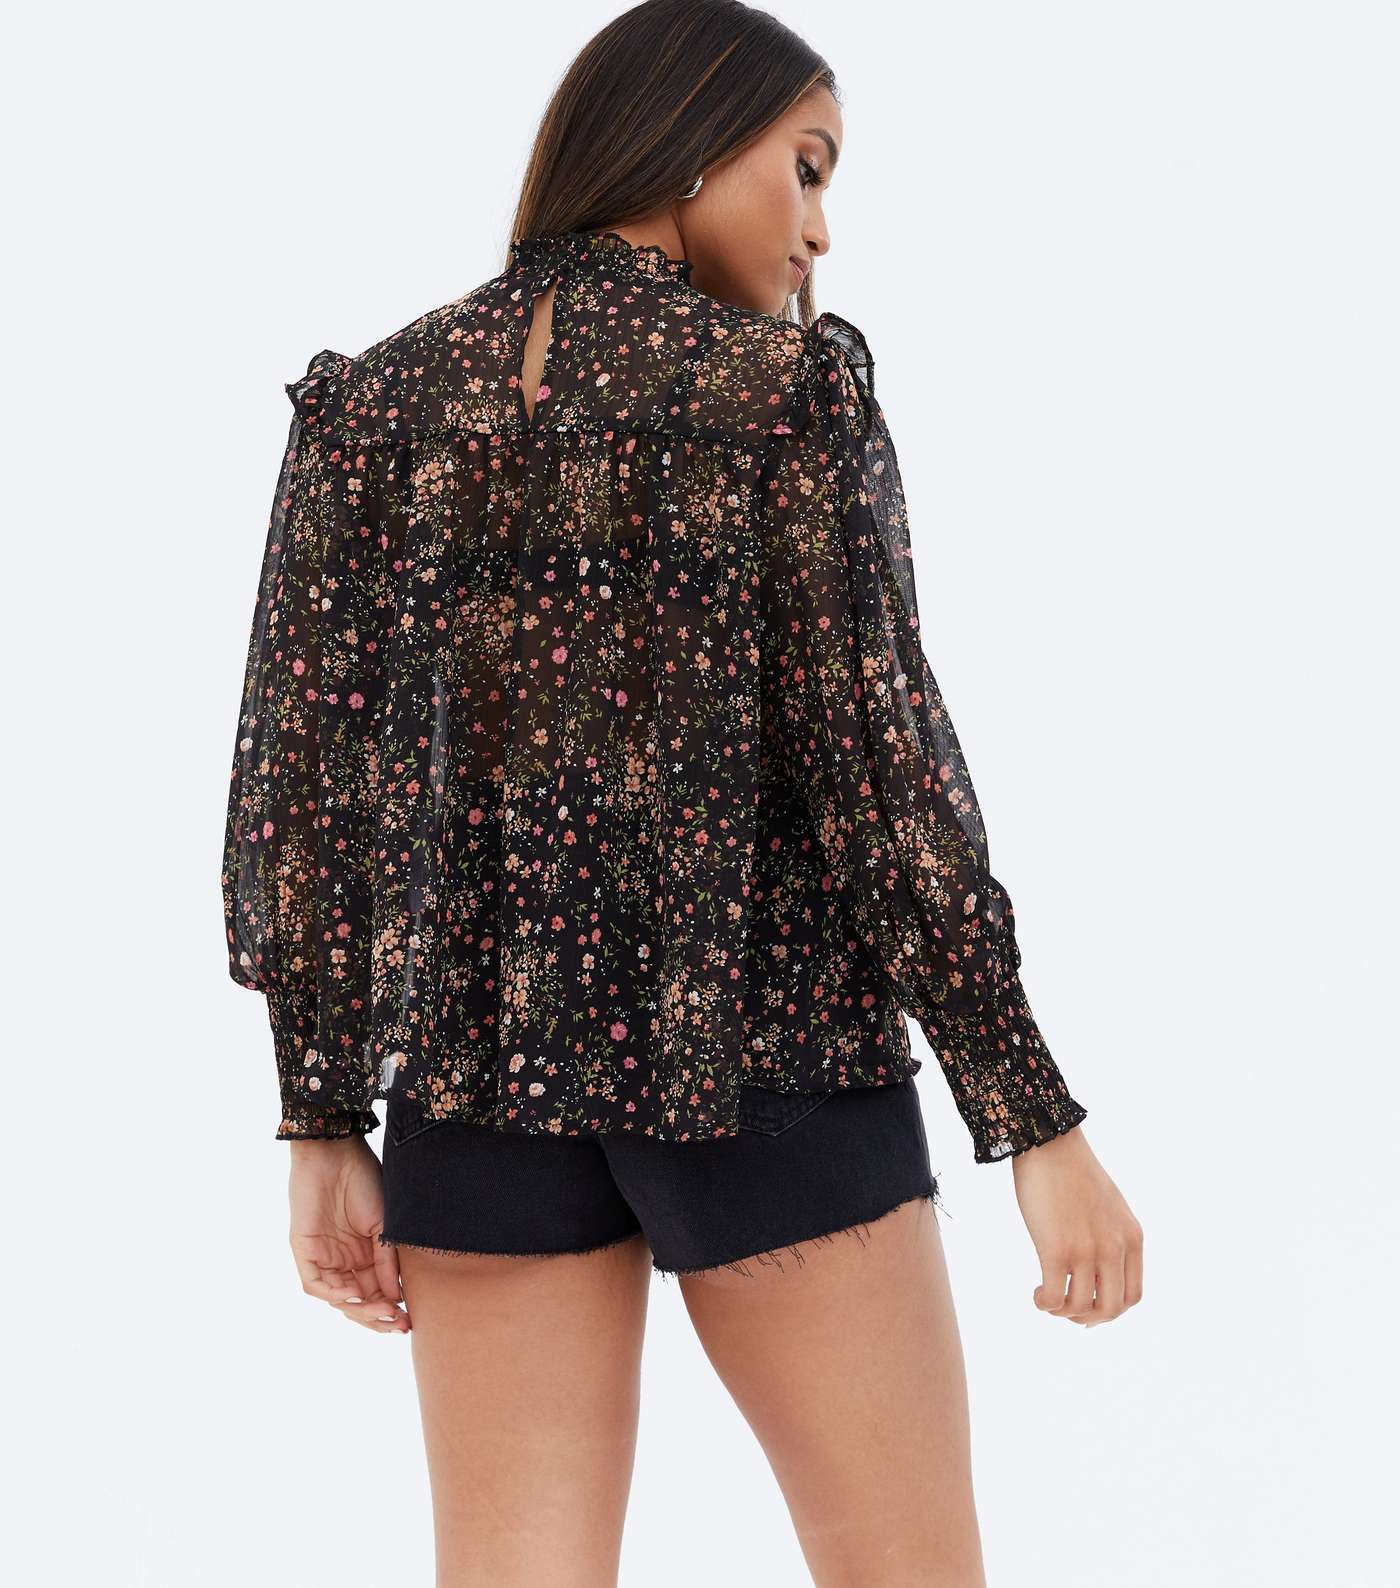 Petite Black Ditsy Floral Chiffon High Neck Puff Sleeve Blouse Image 4